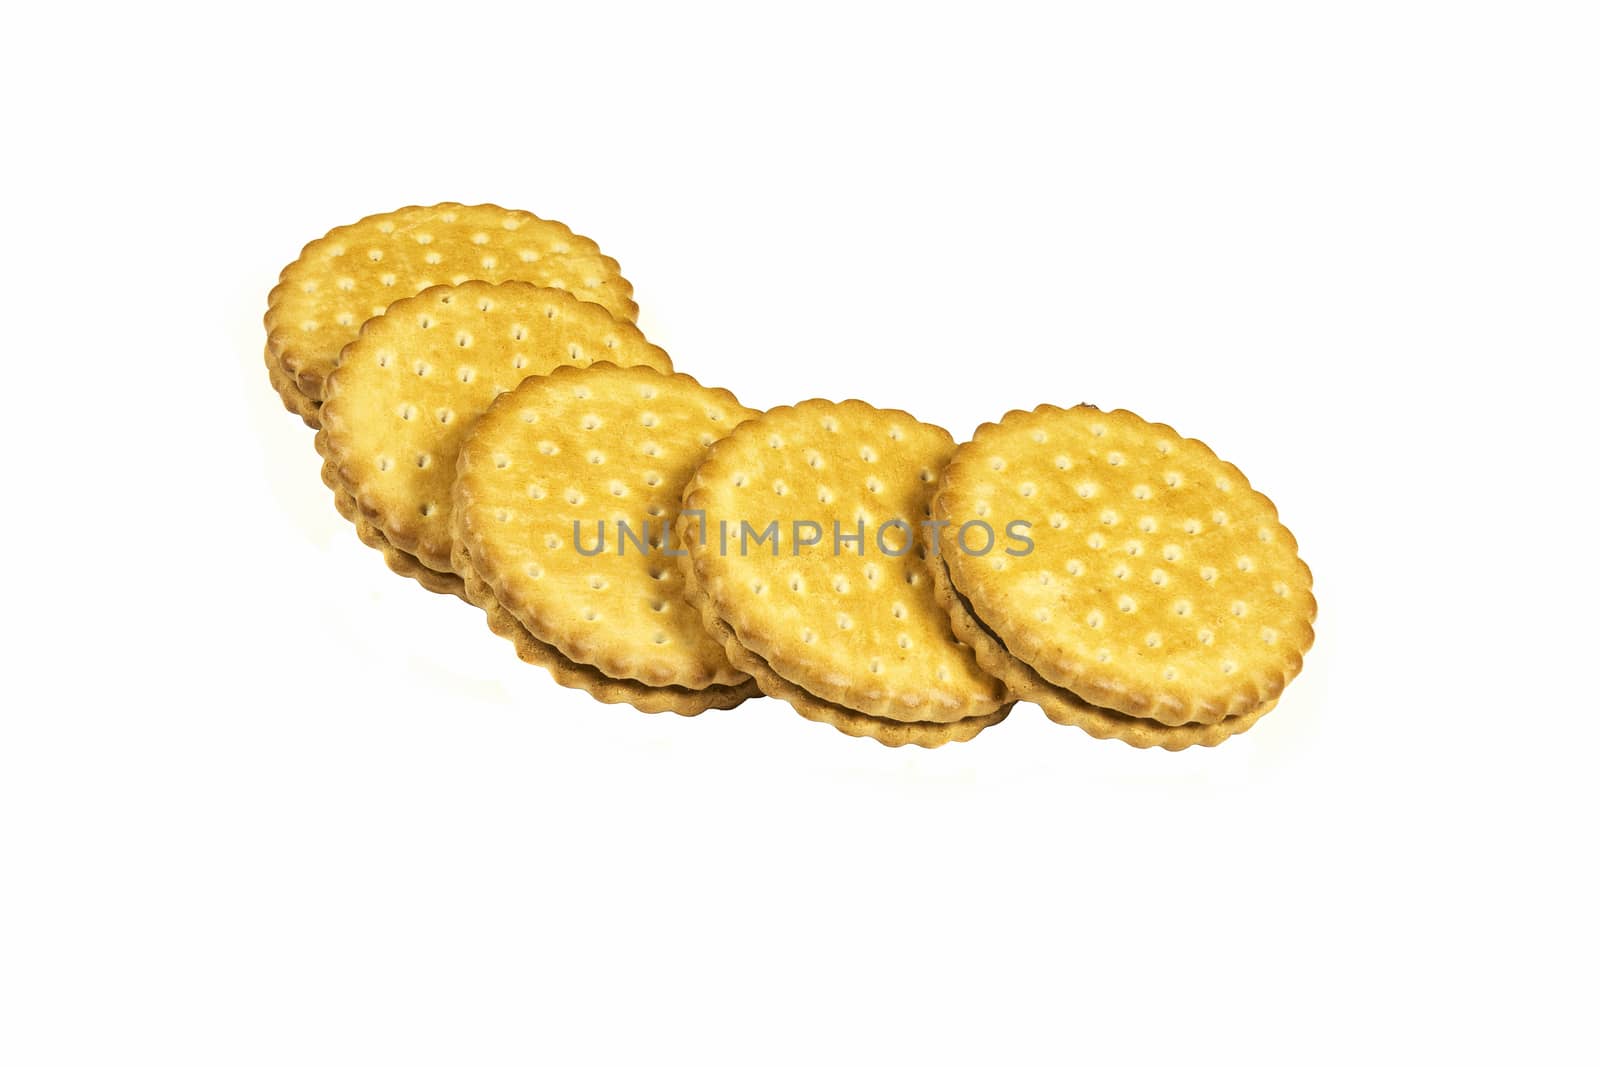 Round biscuits with chocolate filling lie on a light background